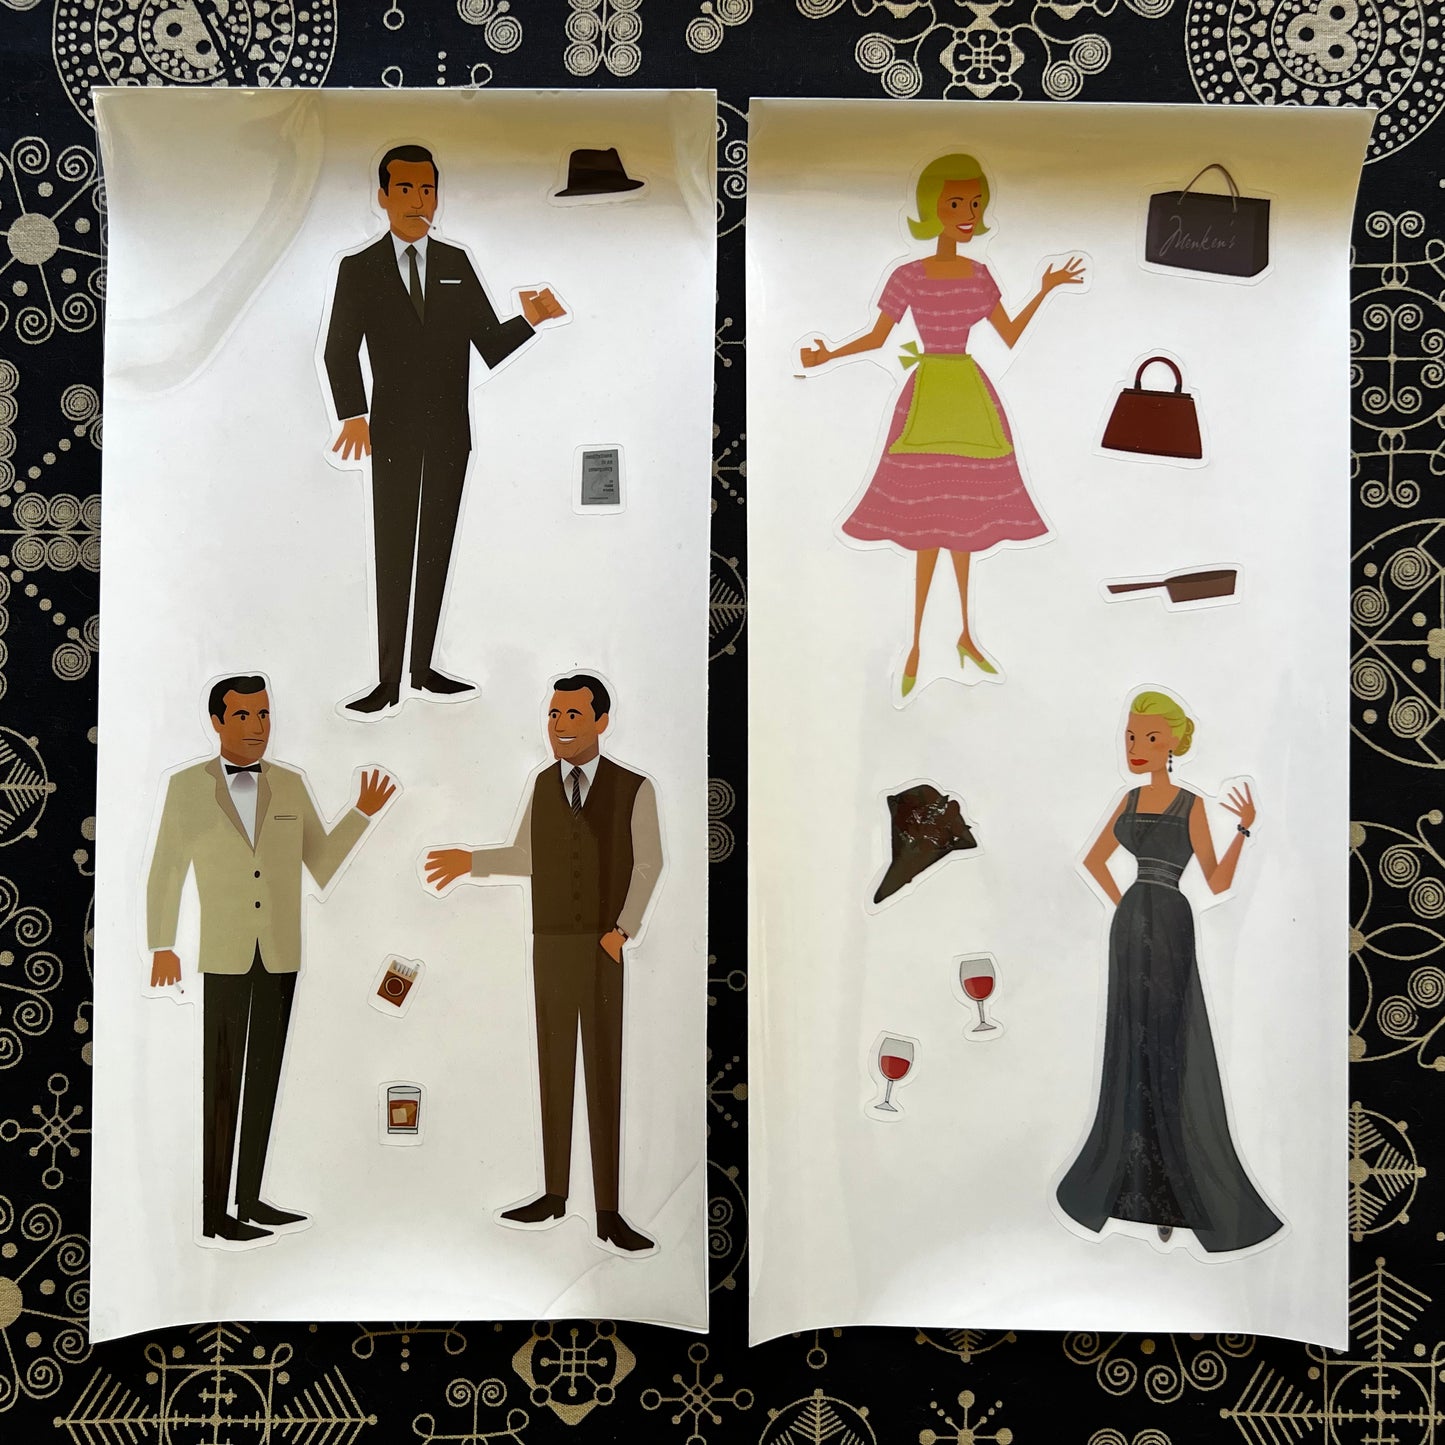 Desktop Mad Men by Dyna Moe- Never Sold in Stores- AMC Exclusive- Rare Collectible